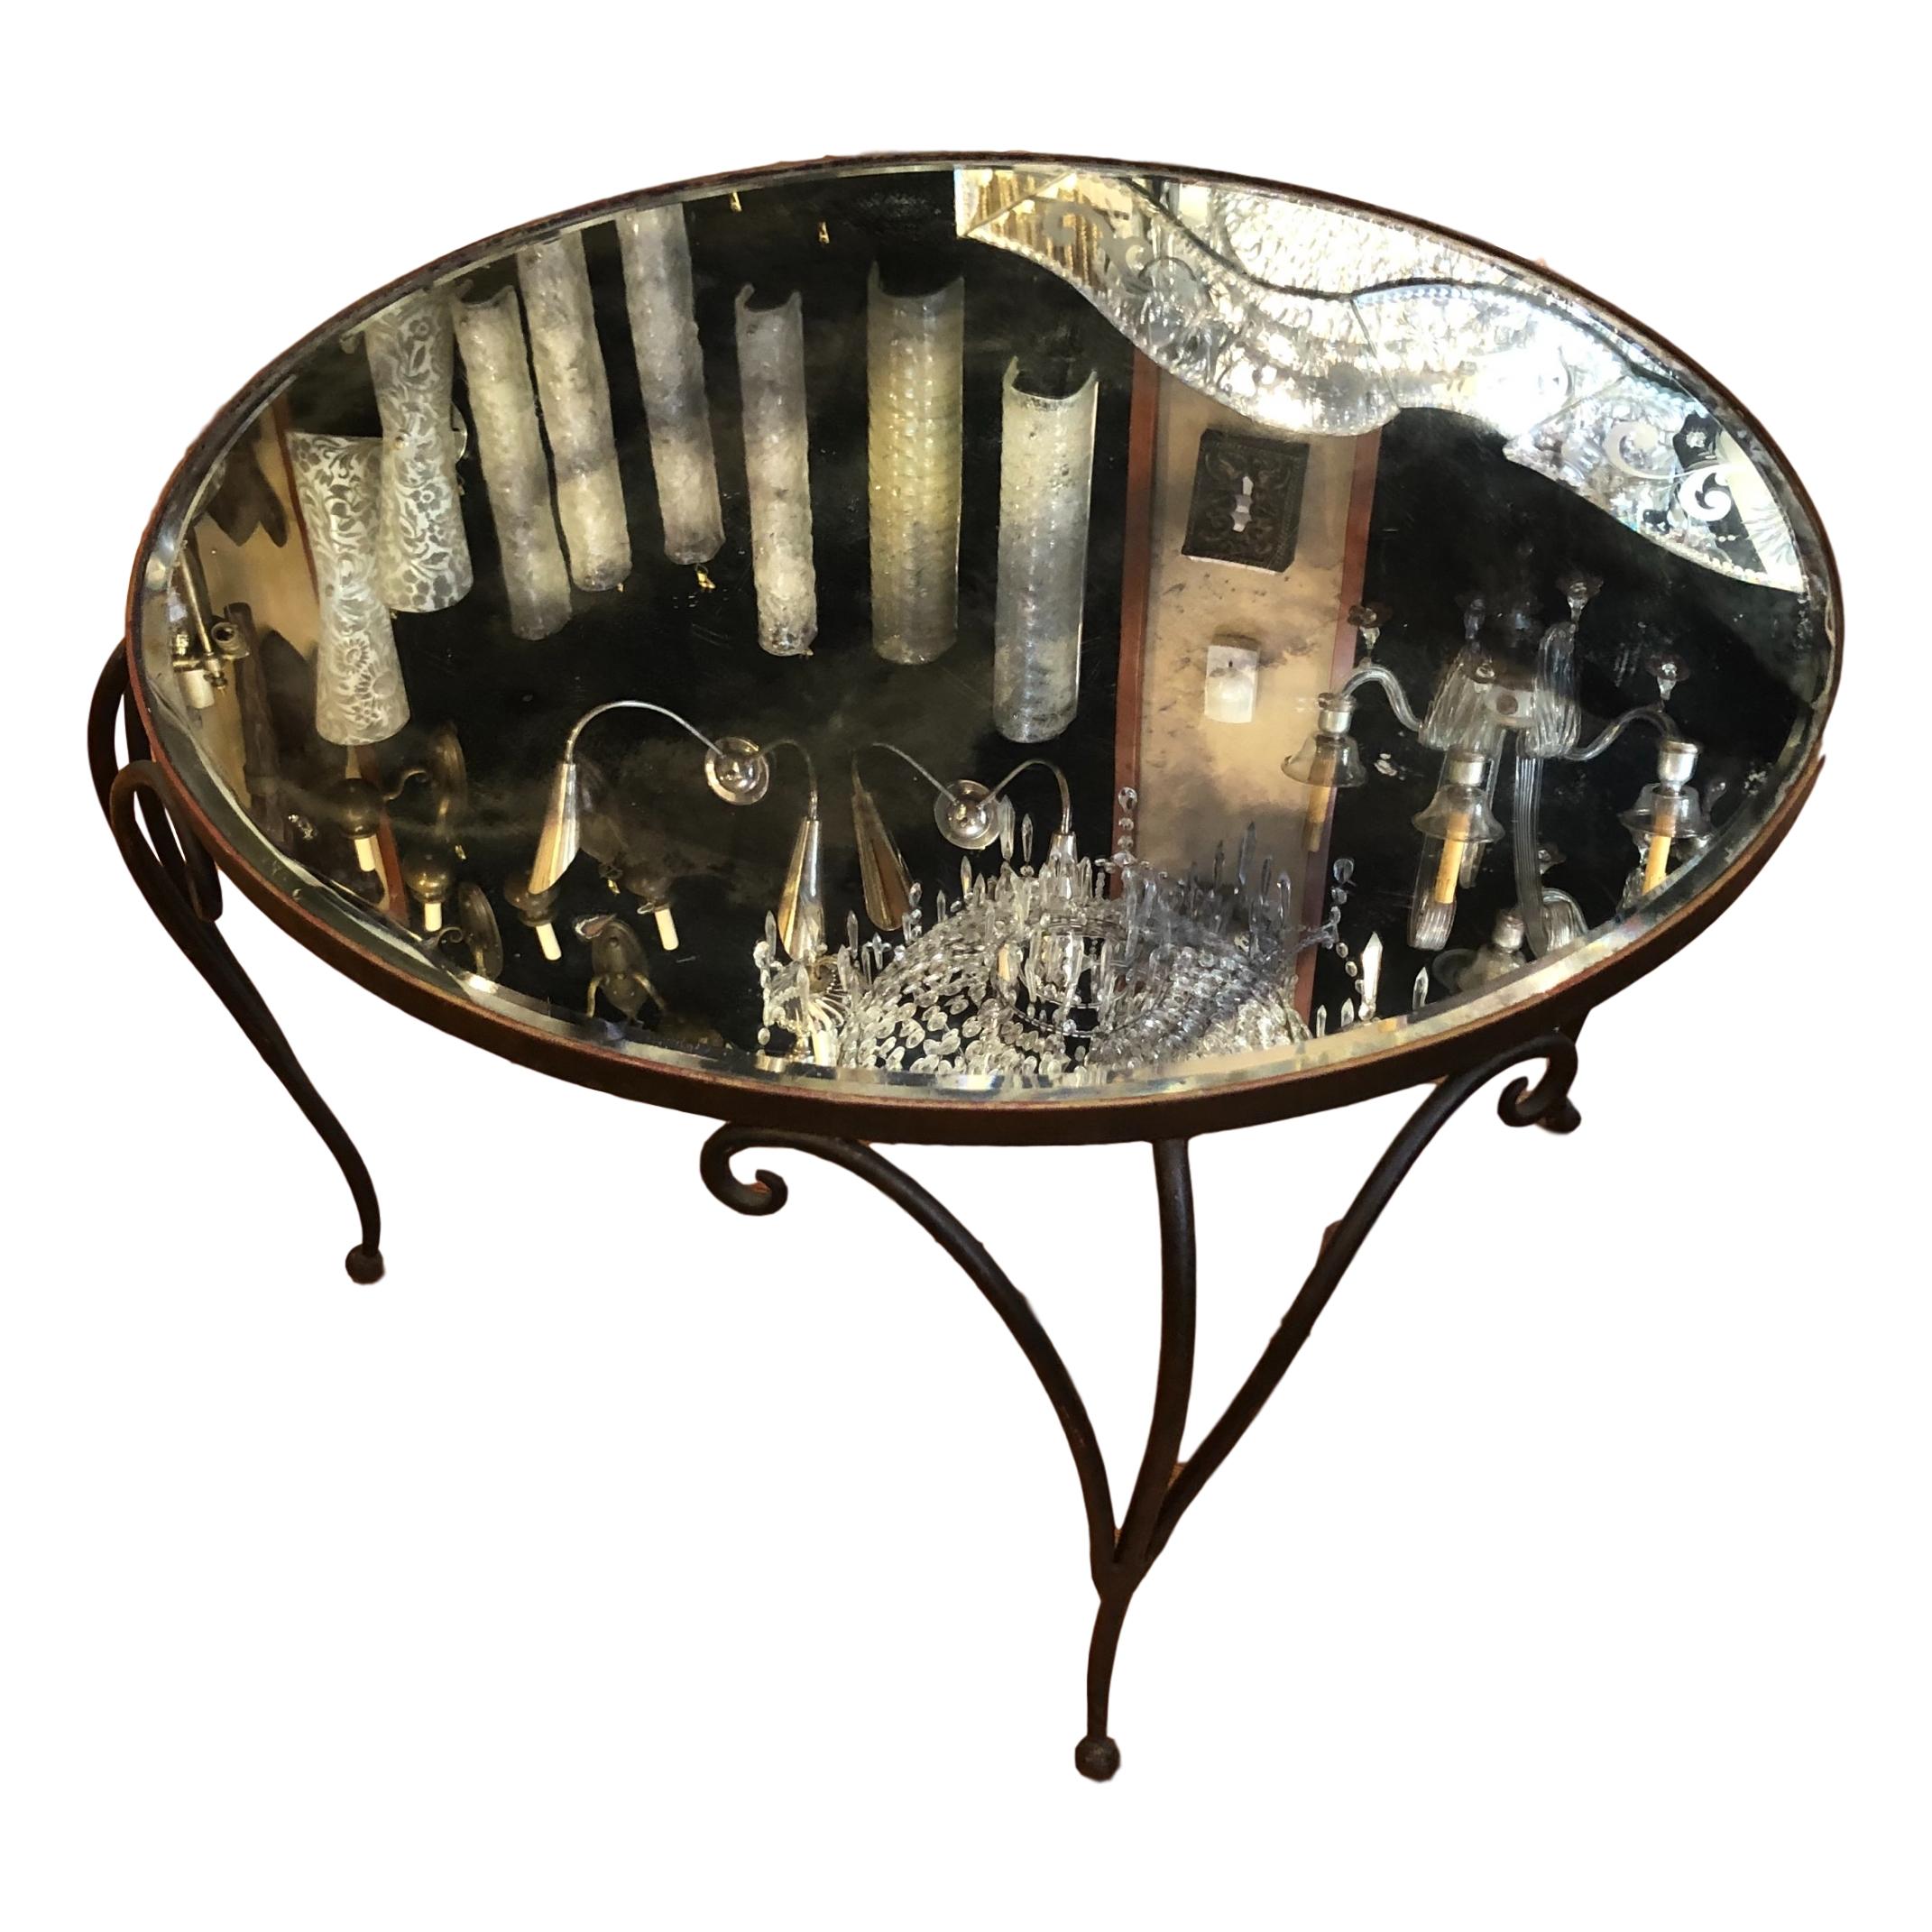 A circa 1930's French wrought iron coffee table with round mirror top.

Measurements:
Height: 18